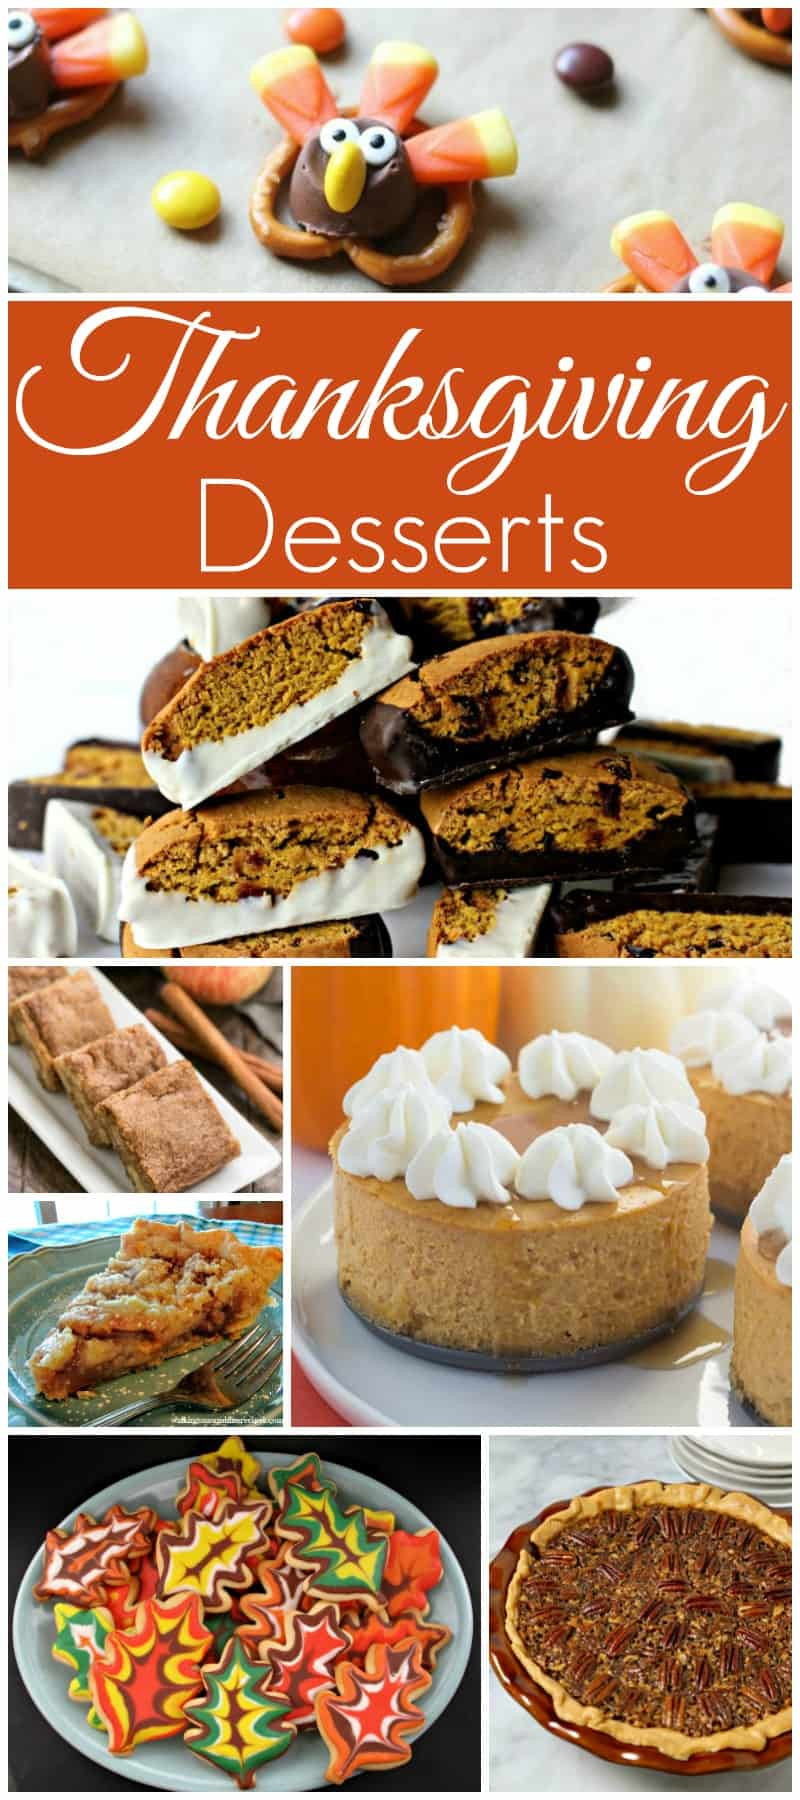 Thanksgiving Recipes Desserts
 Thanksgiving Desserts and our Delicious Dishes Recipe Party